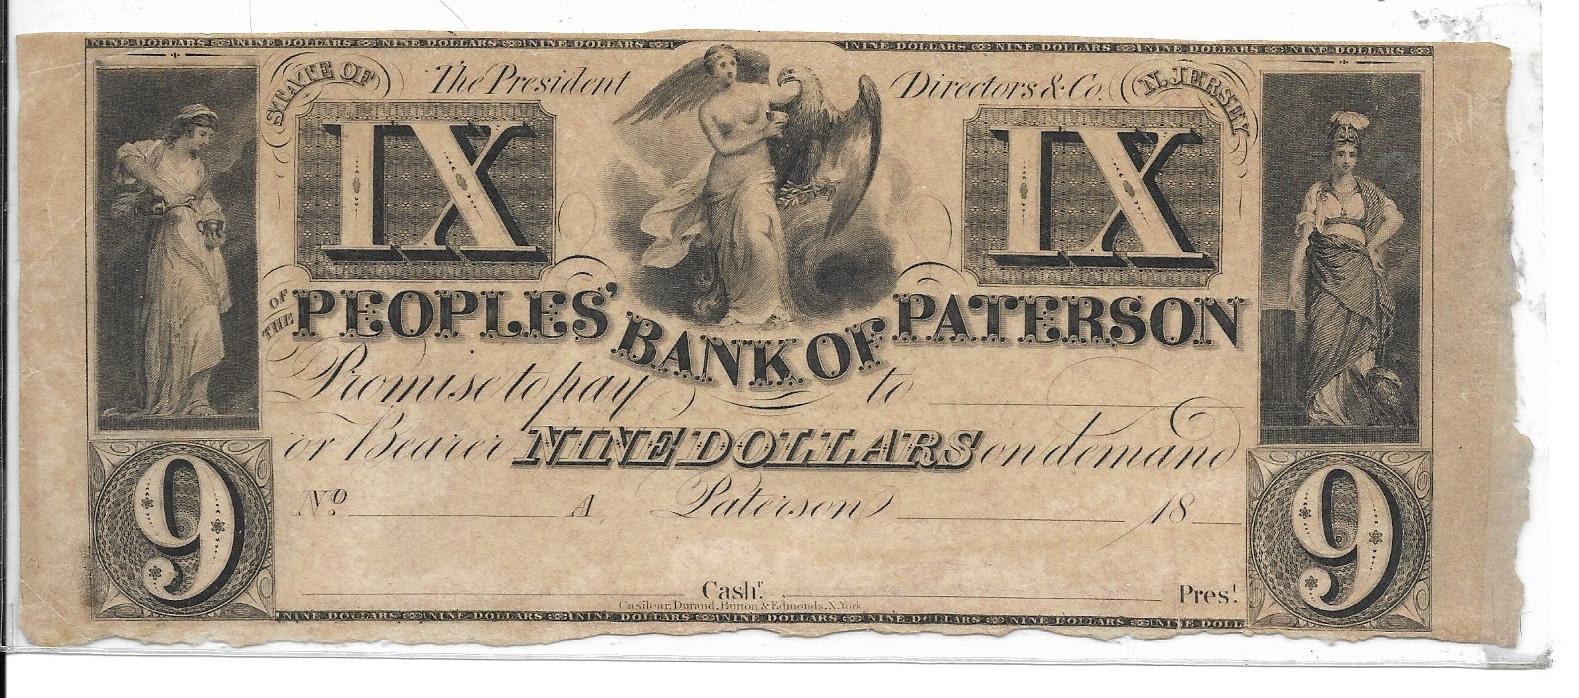 Paterson $9 note.jpg